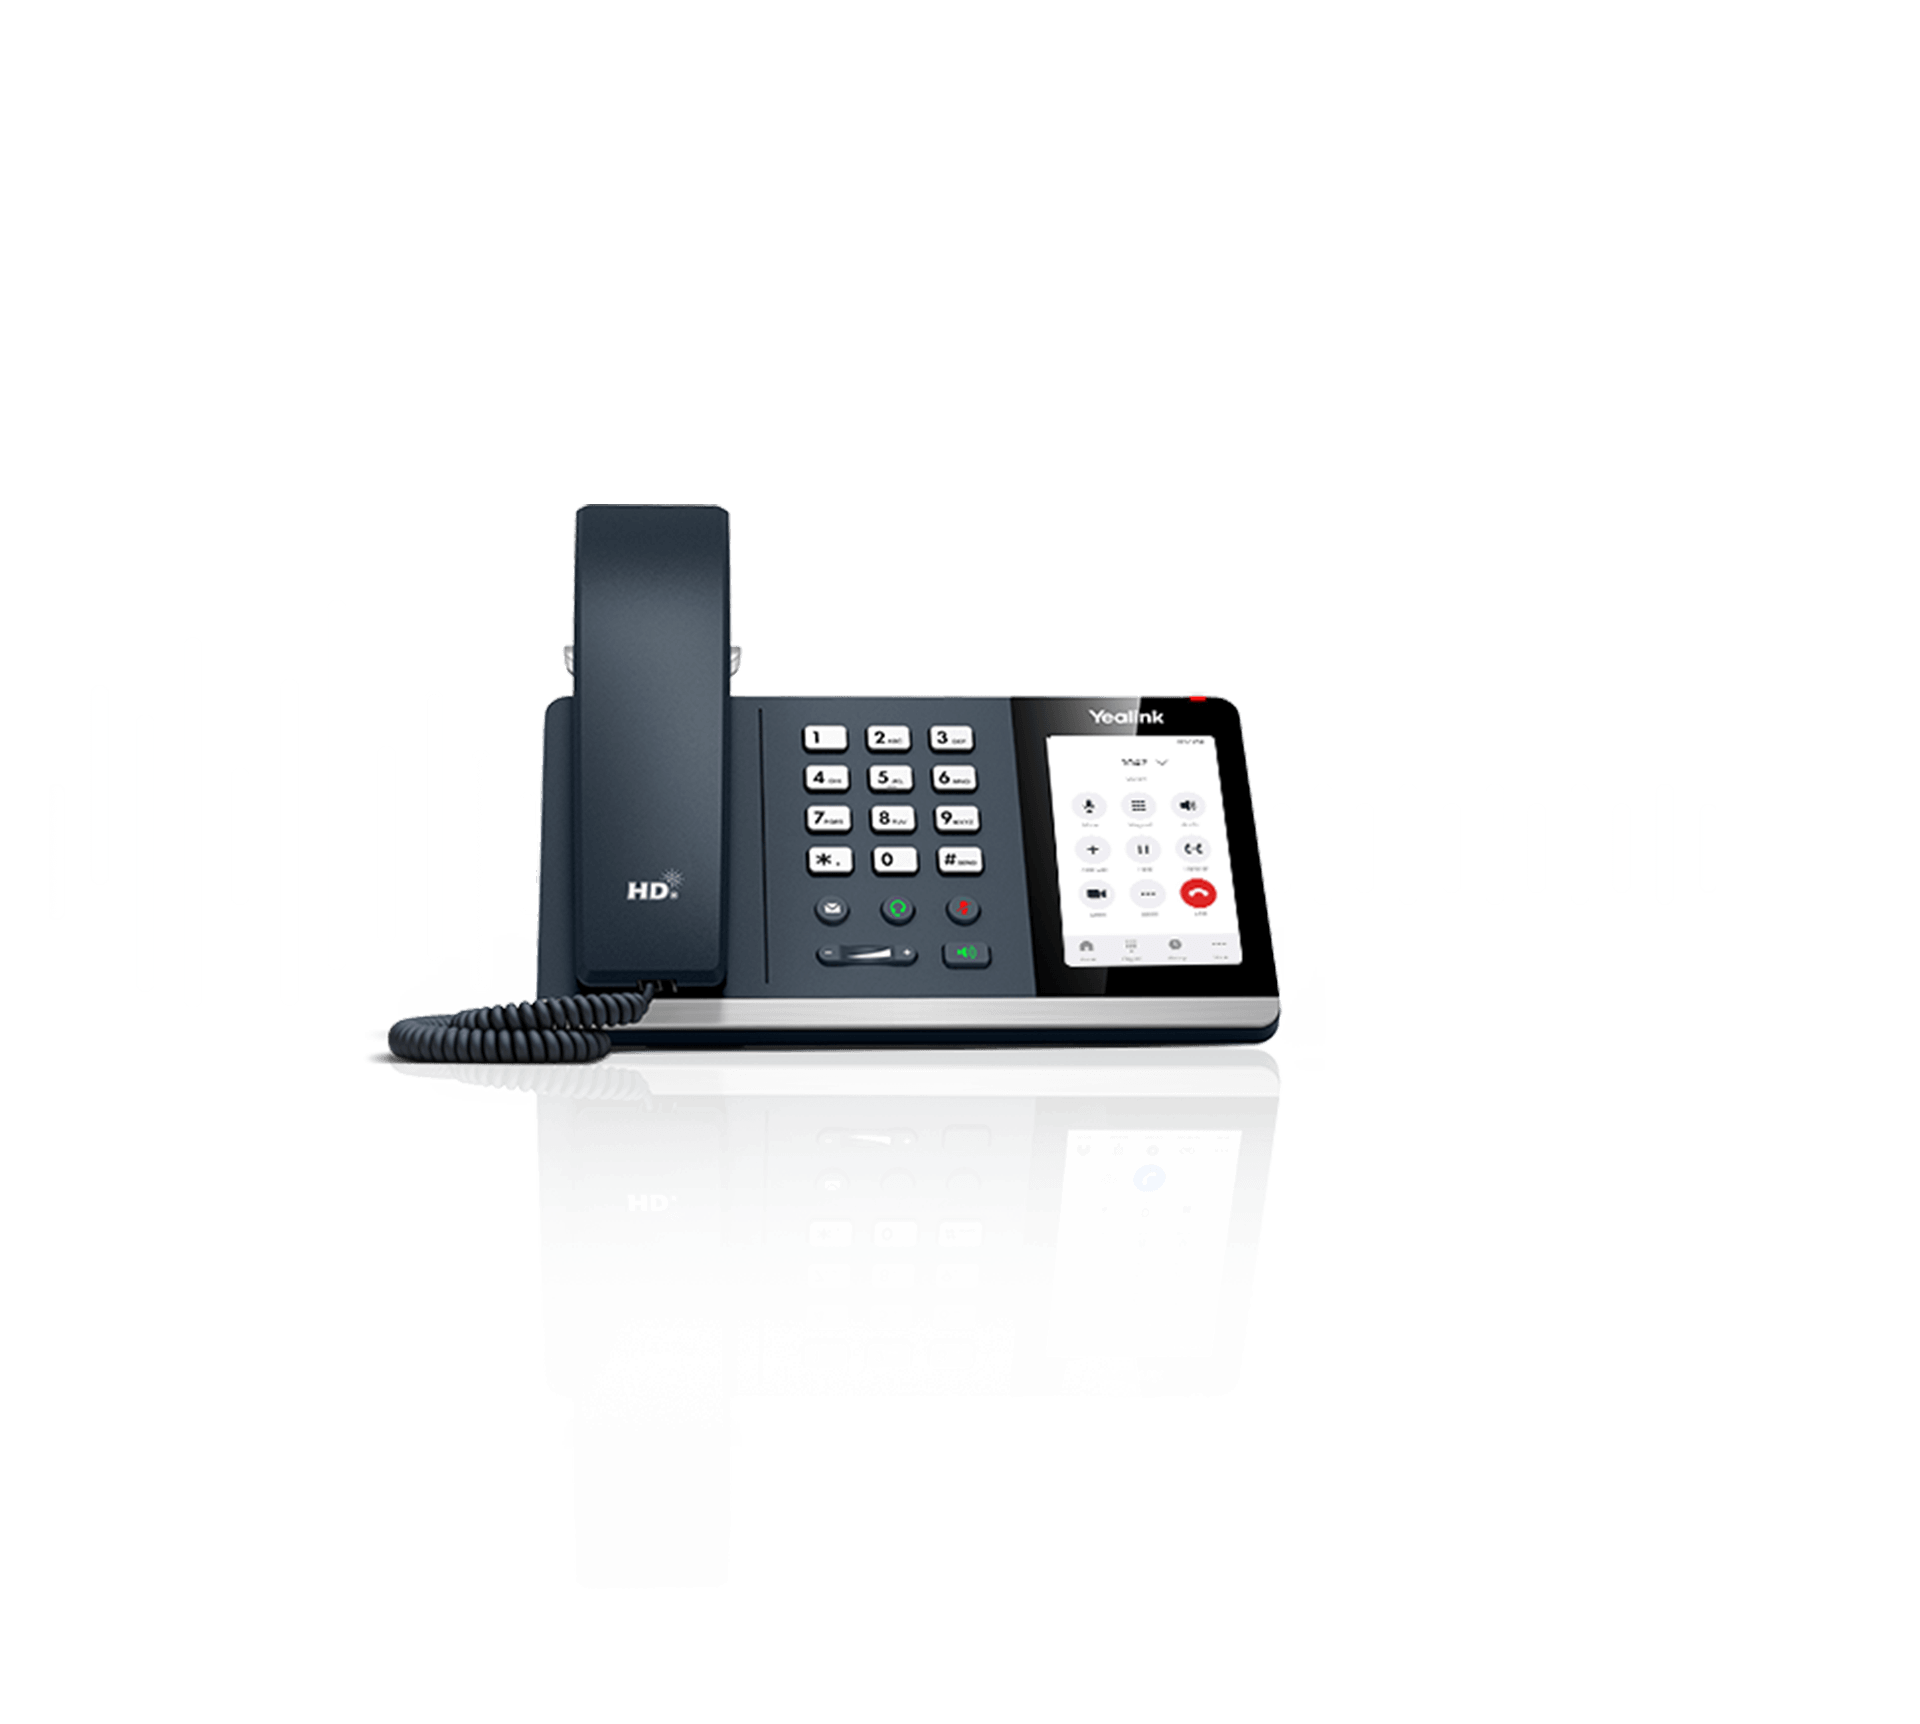 ip phones for business,what is a voip phone,voip business phone,phone system for small business